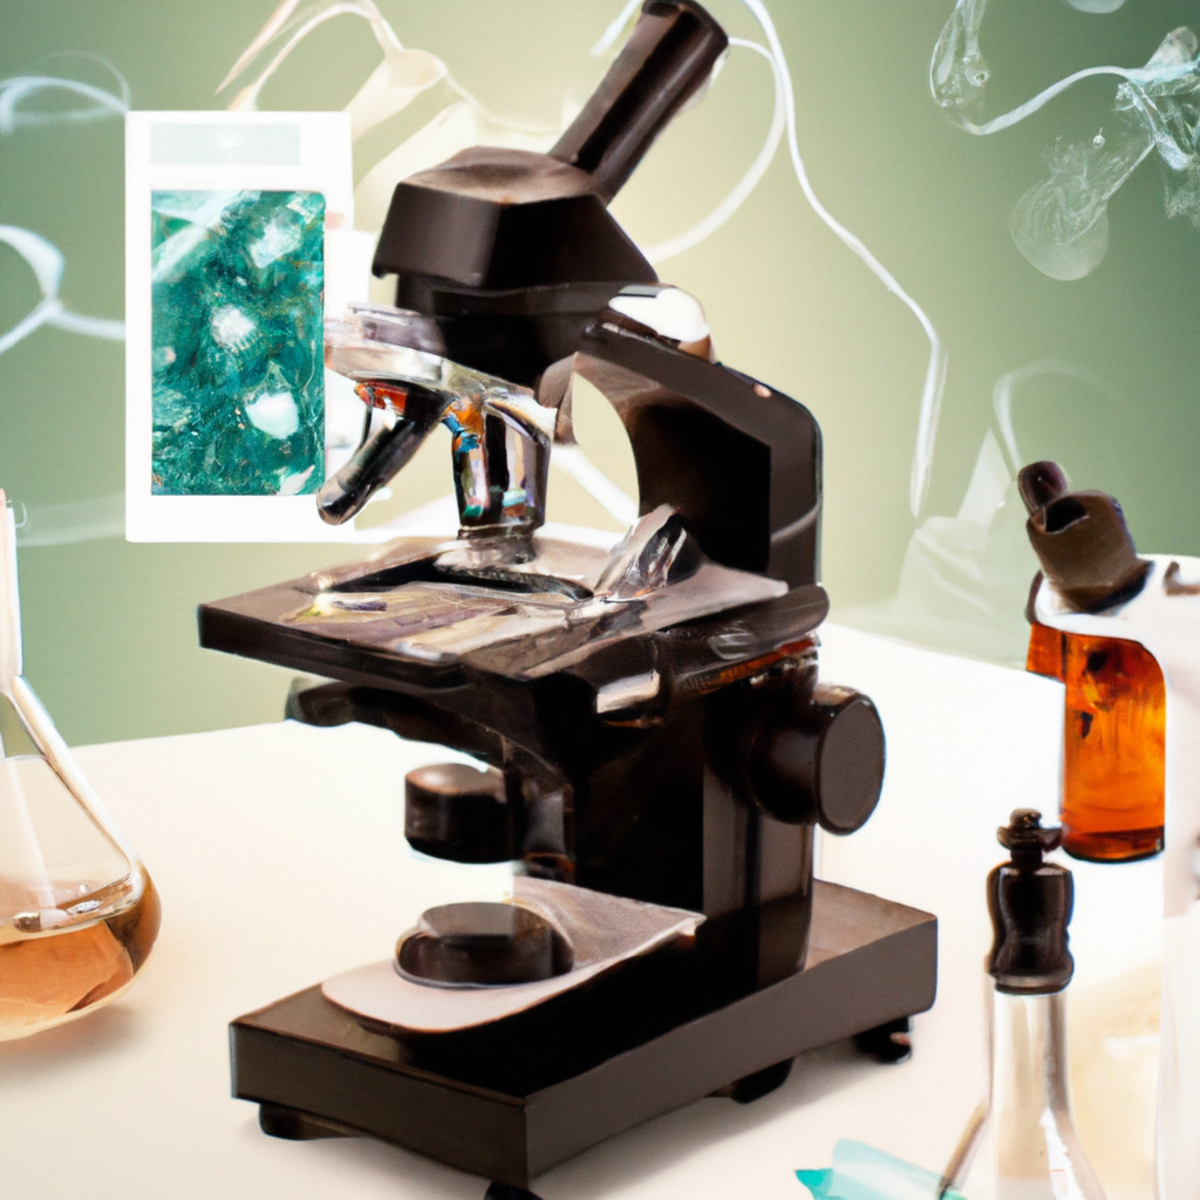 State-of-the-art microscope diagnosing nephronophthisis, surrounded by scientific equipment in a medical lab setting.